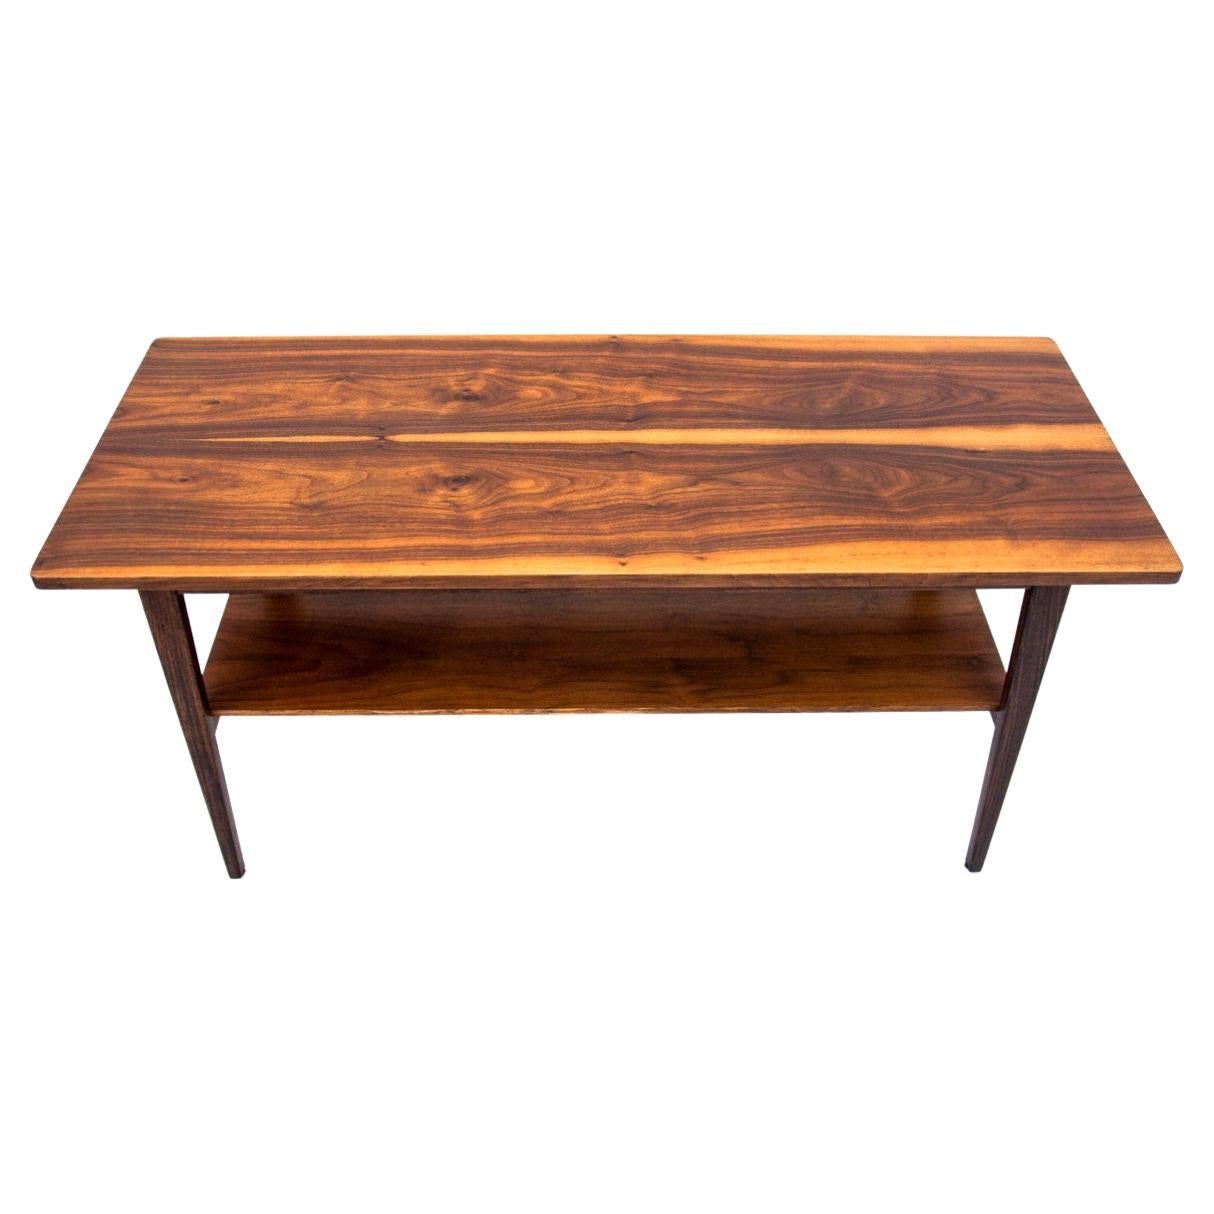 Midcentury Walnut Coffee Table, Poland, 1950s, Restored For Sale